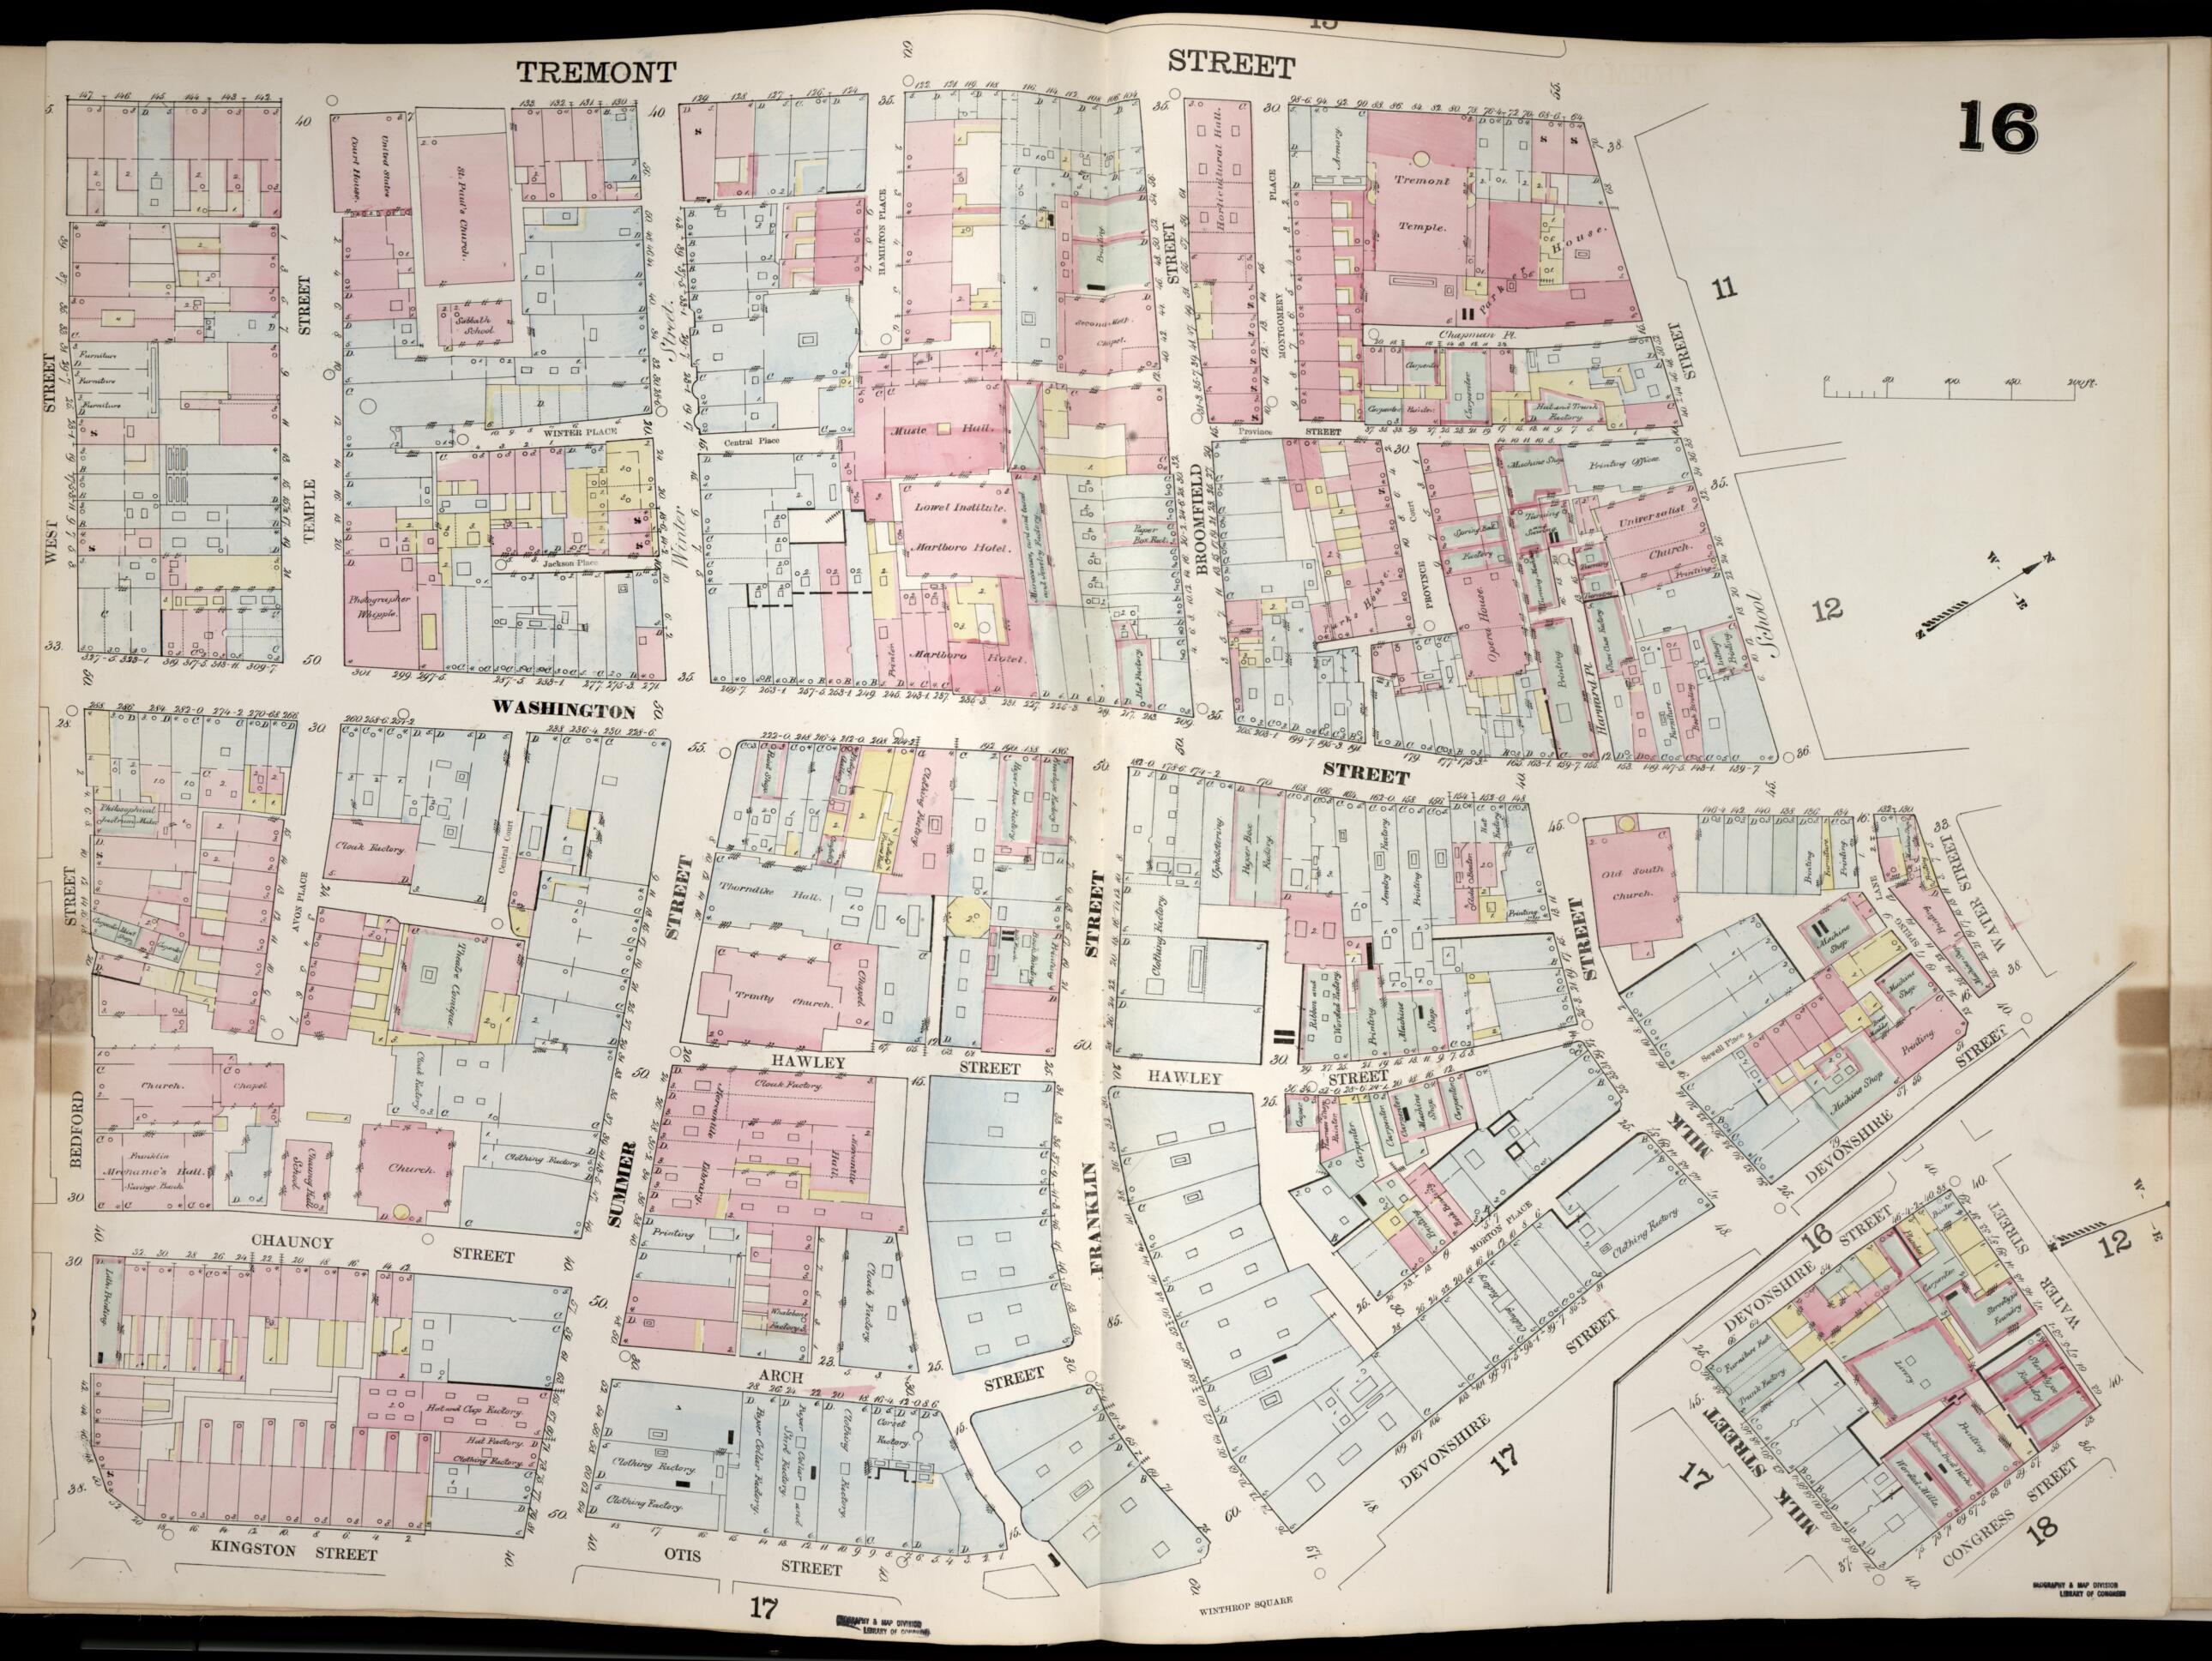 This old map of Image 17 of Boston from Insurance Map of Boston. Volume 1 from 1867 was created by D. A. (Daniel Alfred) Sanborn in 1867